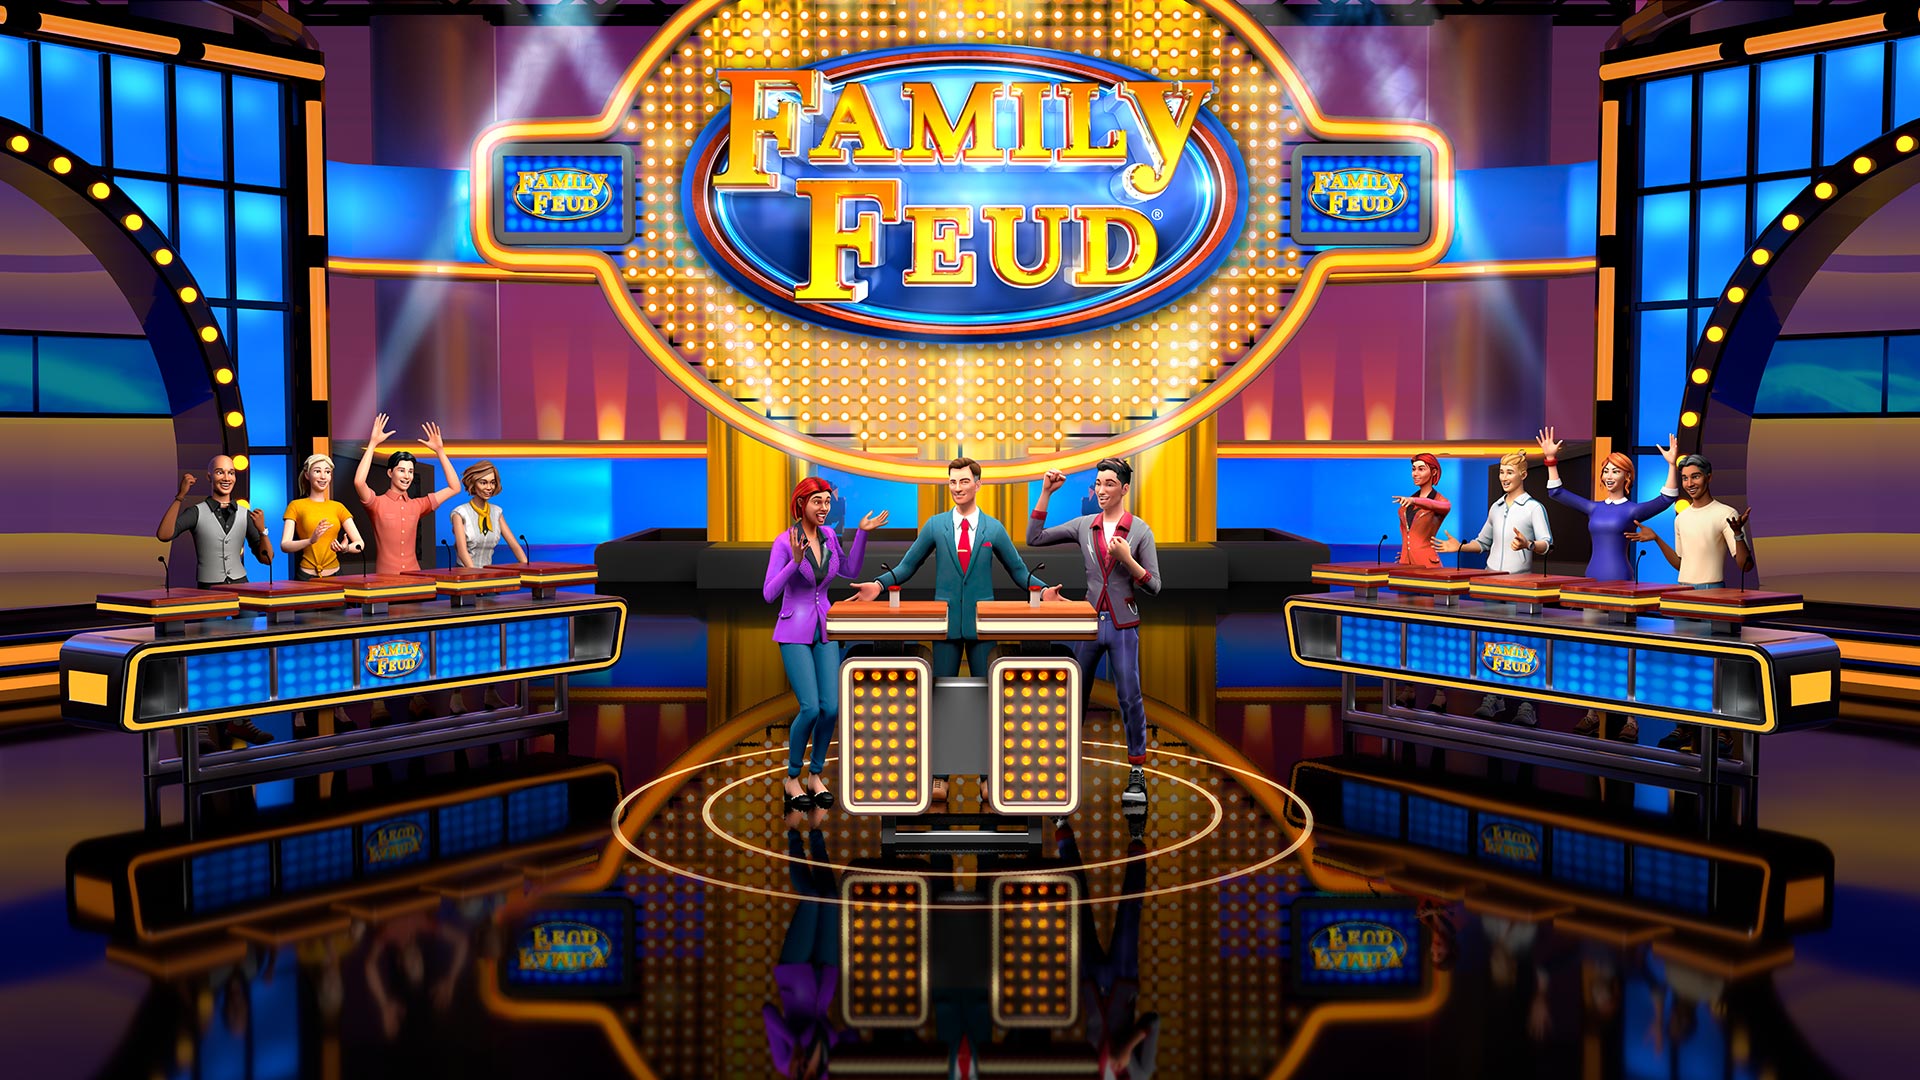 Can You Make A Family Feud Game On Powerpoint